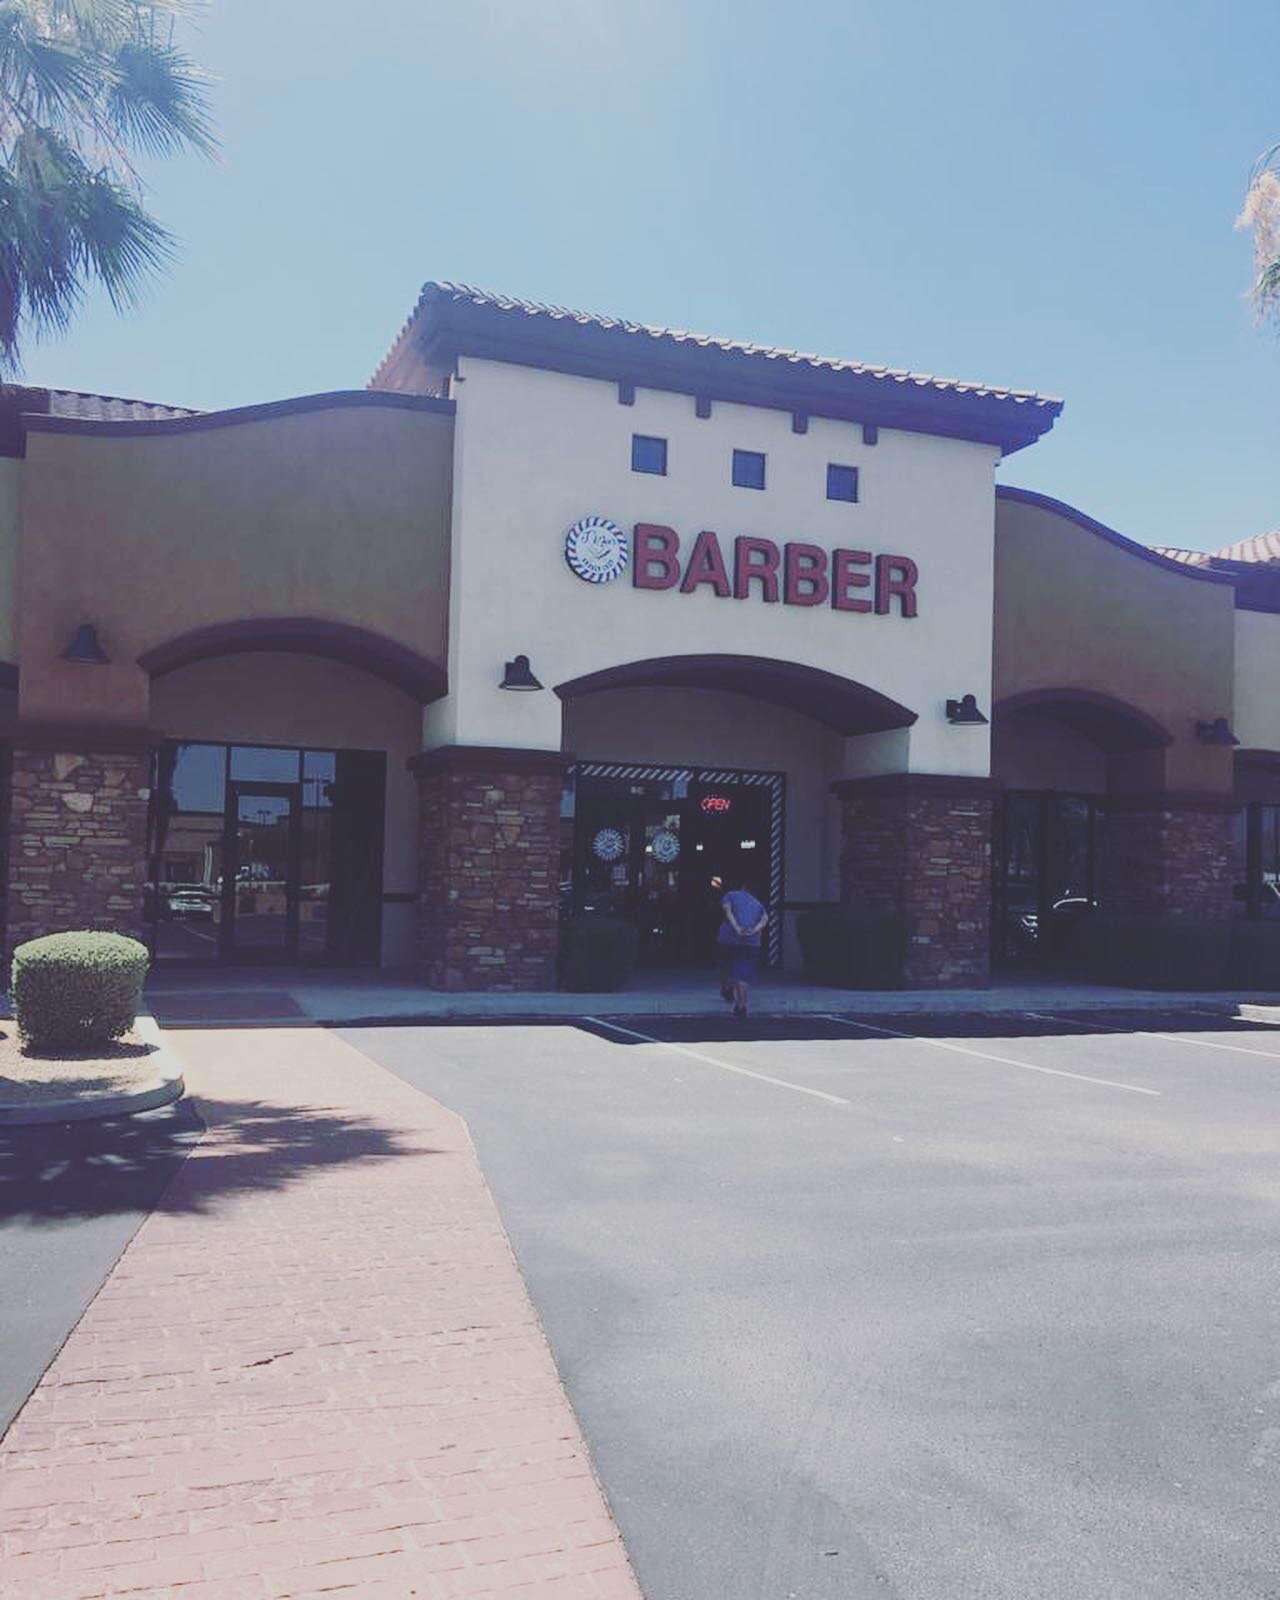 Recently Governor Ducey announced shops like ours may reopen for business on May 8th. We know our loyal wonderful patrons are excited but still cautious about Covid-19. Keeping that in mind we had decided to take precautions. During this reopening we